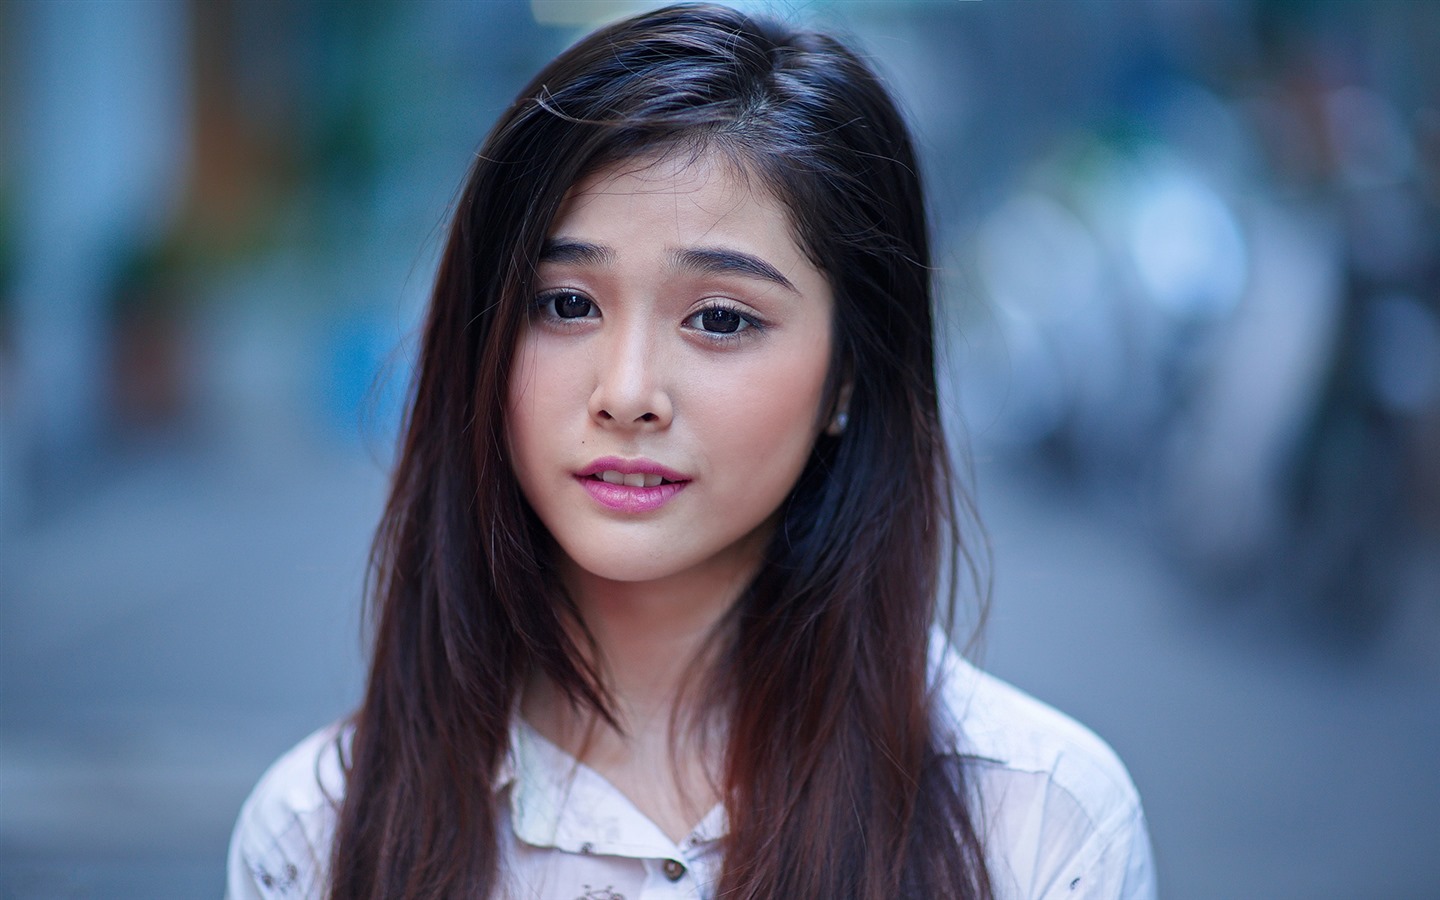 Pure and lovely young Asian girl HD wallpapers collection (1) #31 - 1440x900